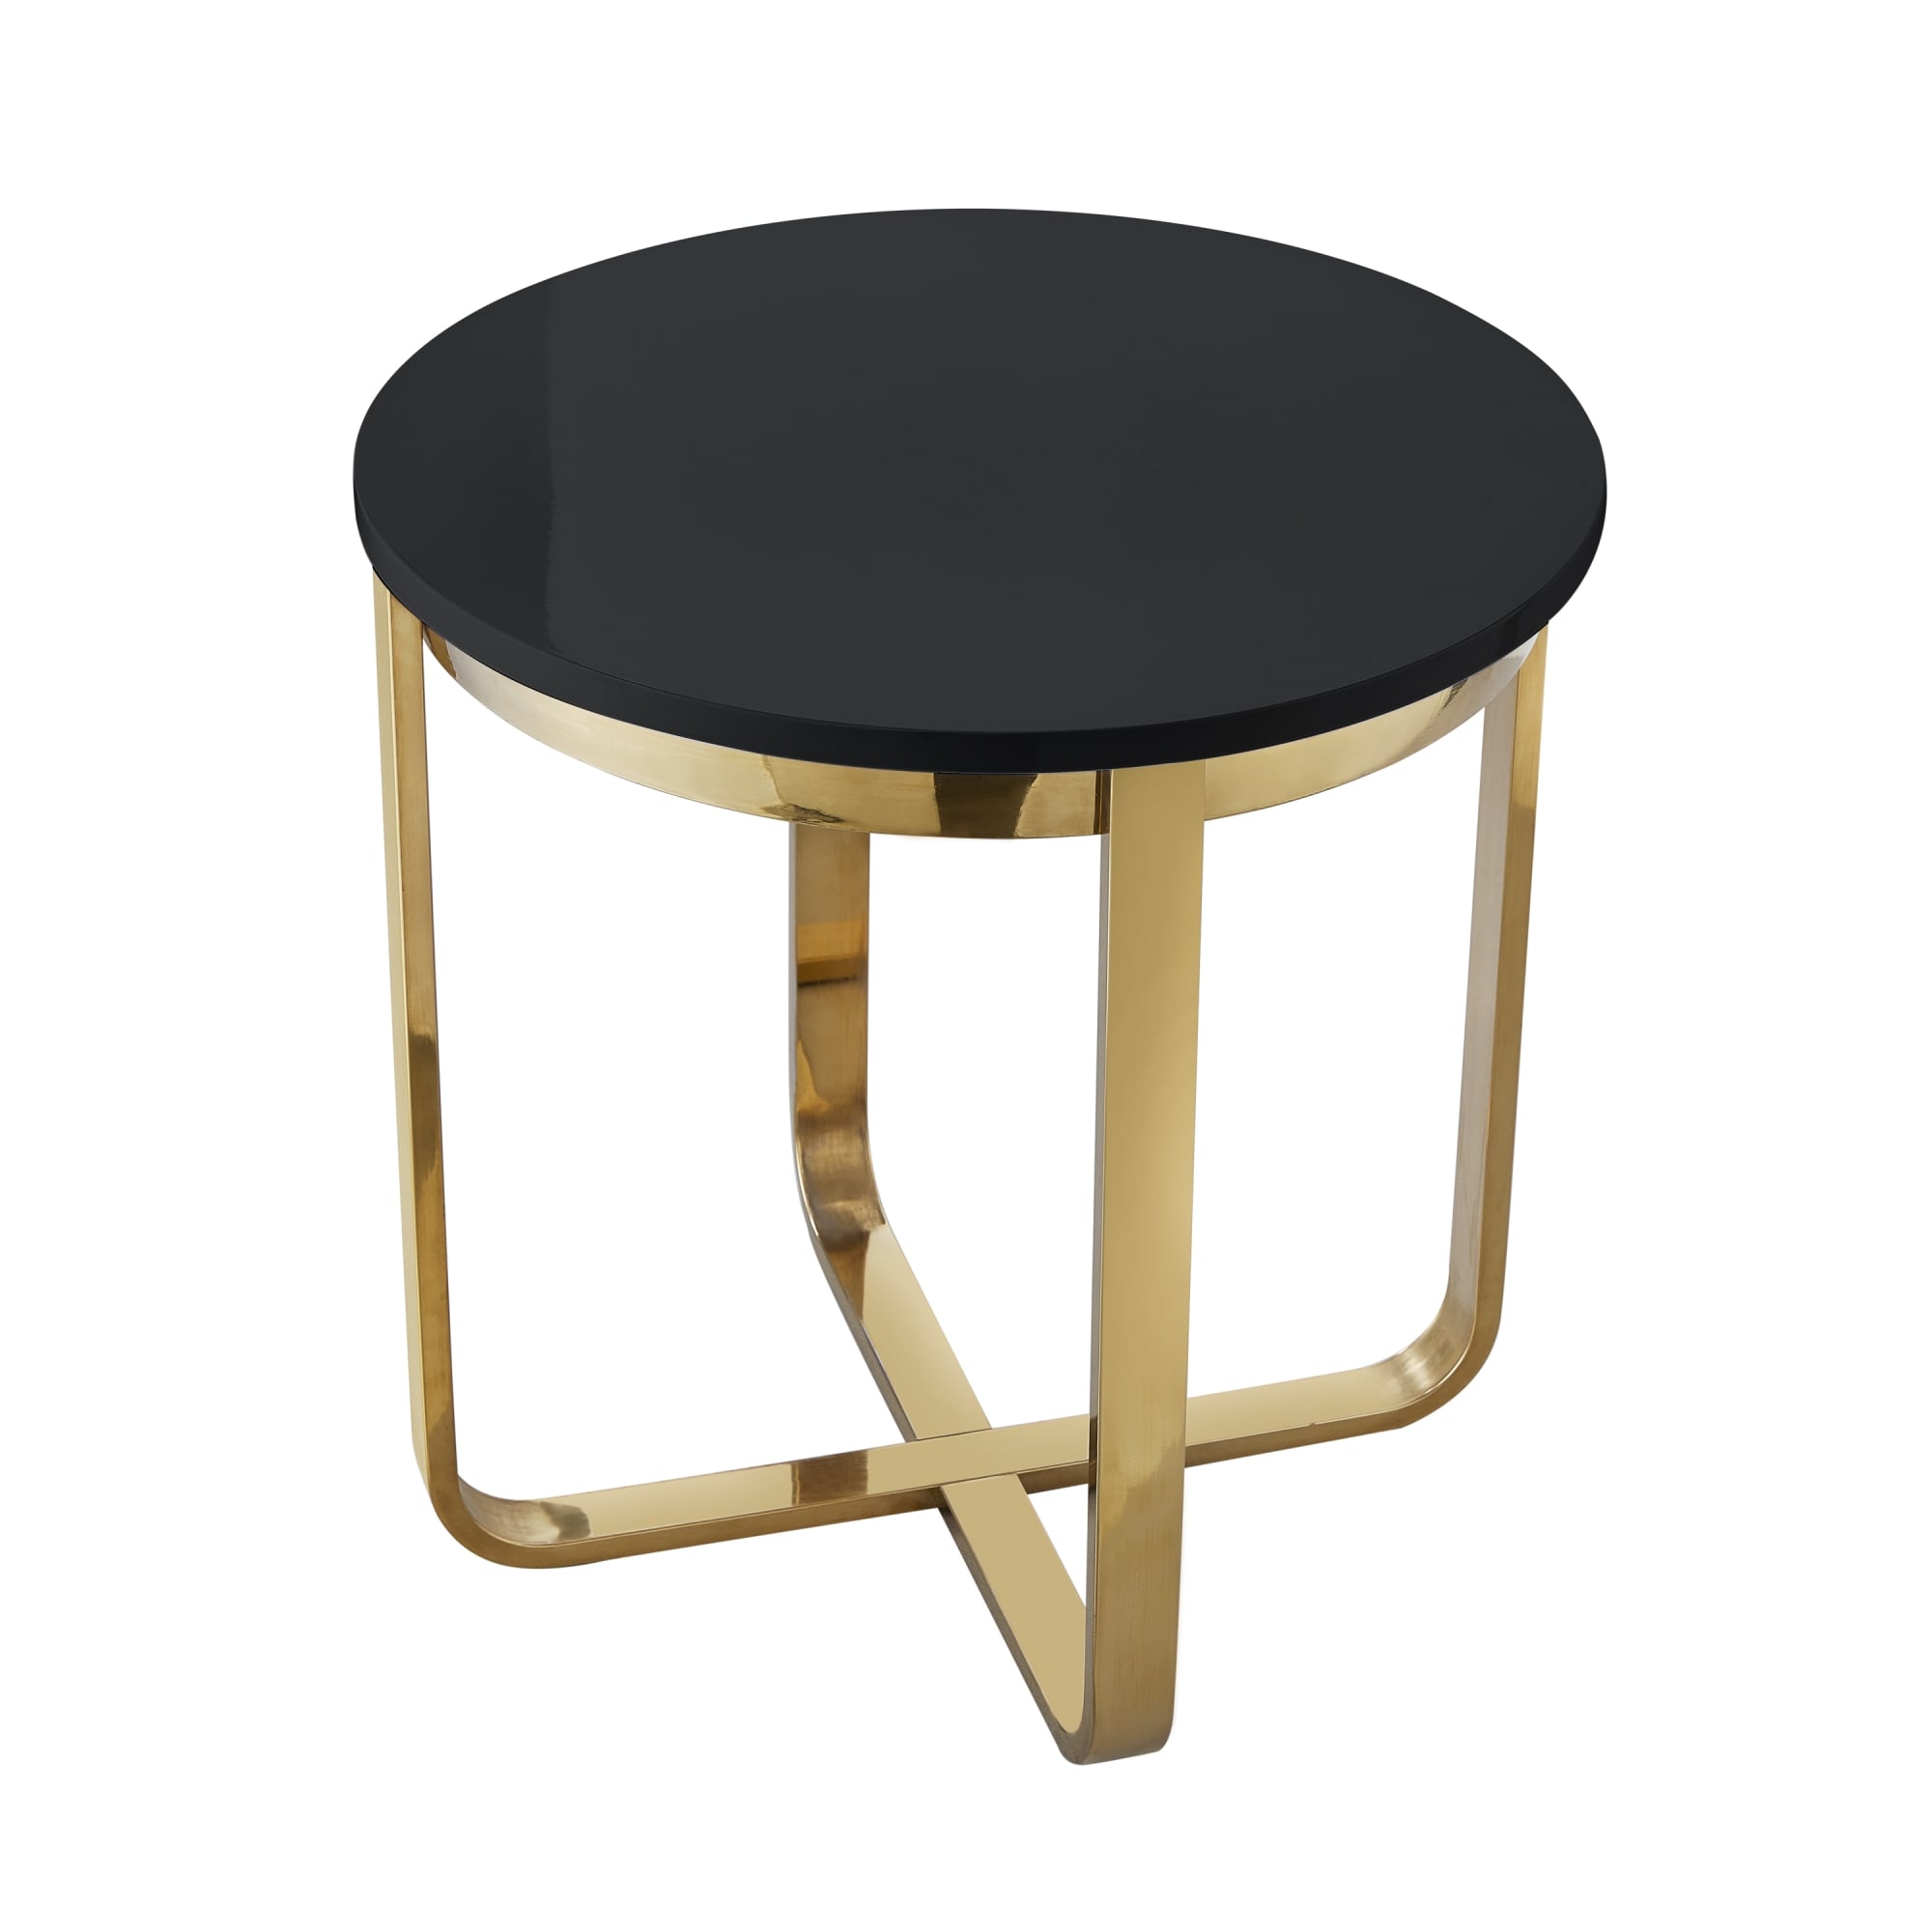 Living Room End Tables - From Black To Gold - Addicted 2 Decorating®